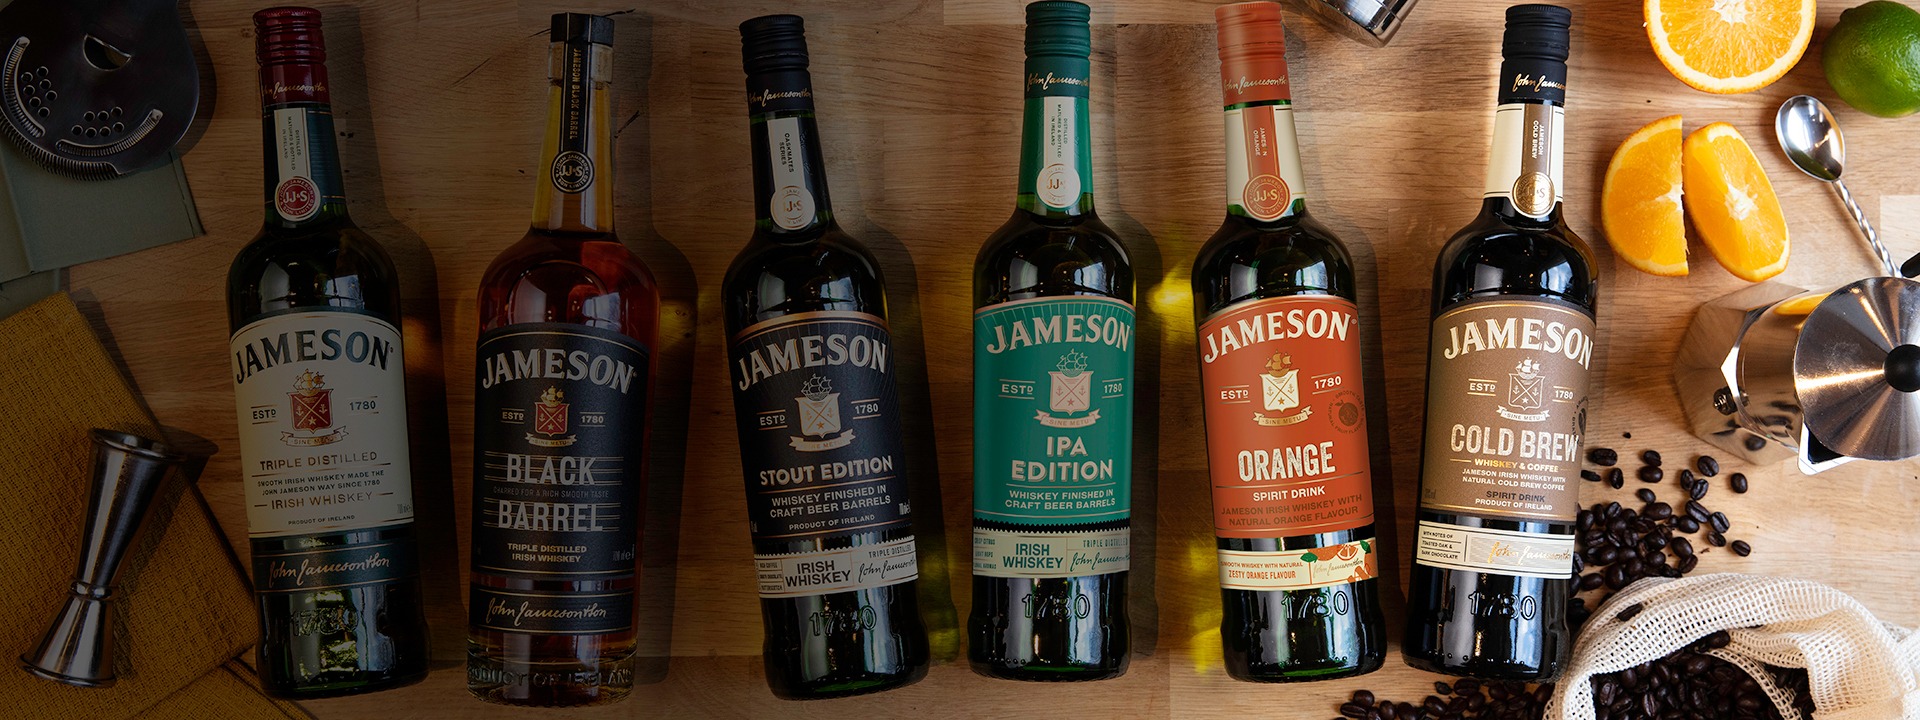 Jameson Products